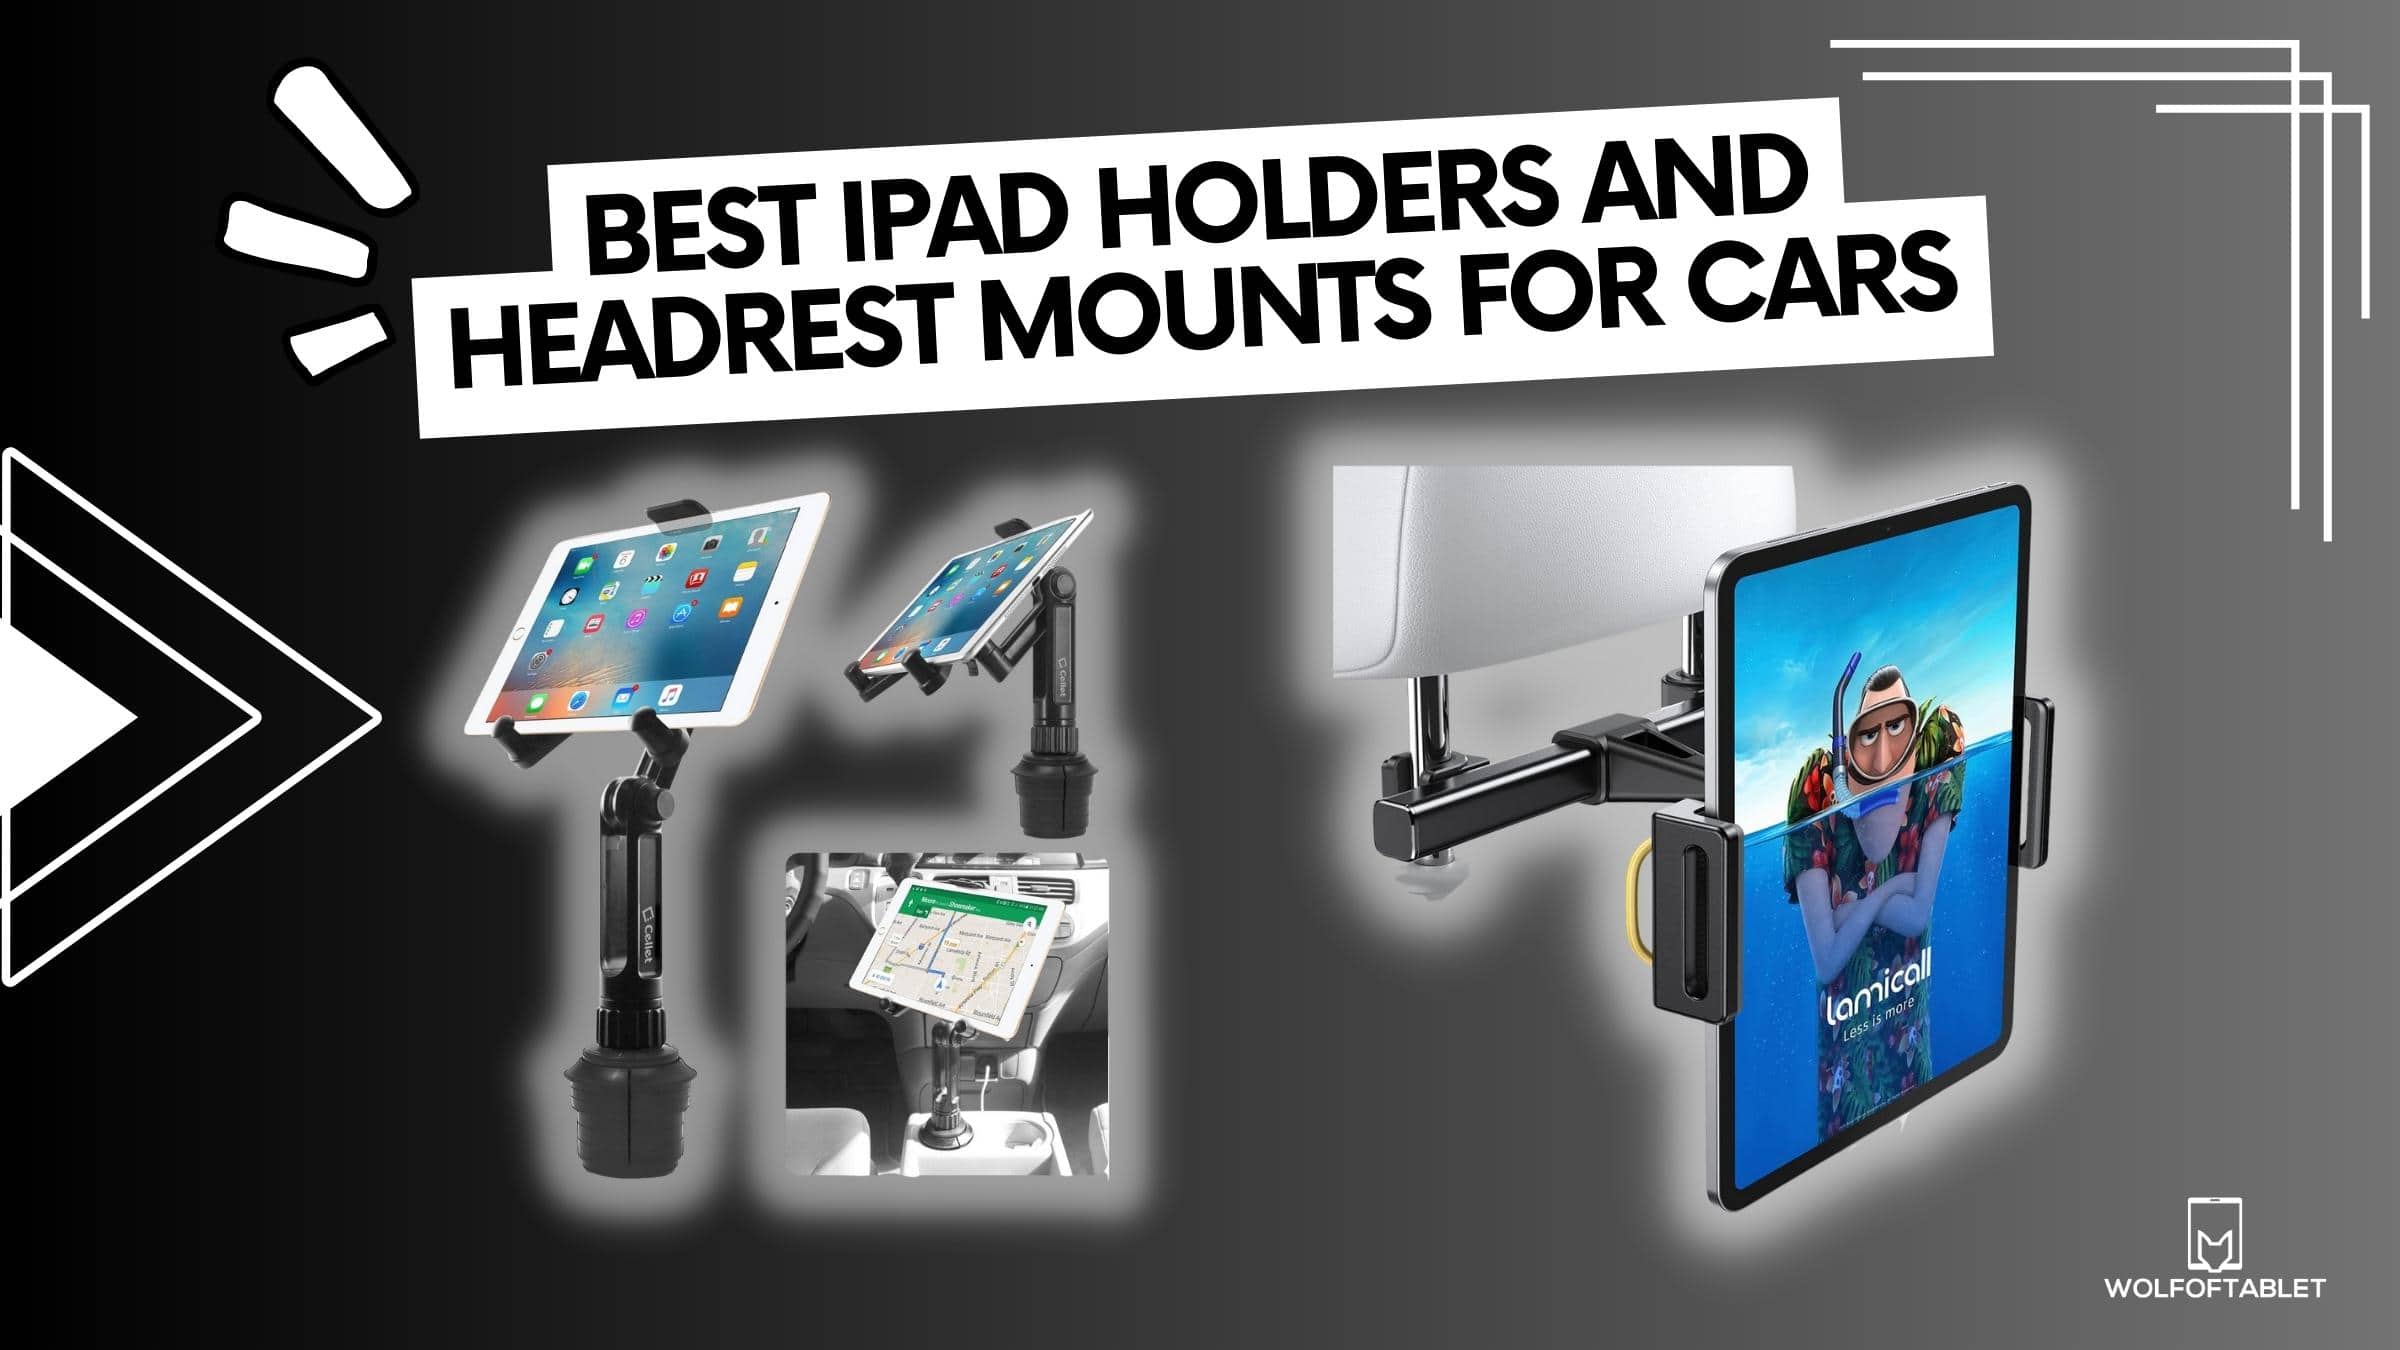 best ipad holders for car and best ipad headrest mounts for cars - tip picks